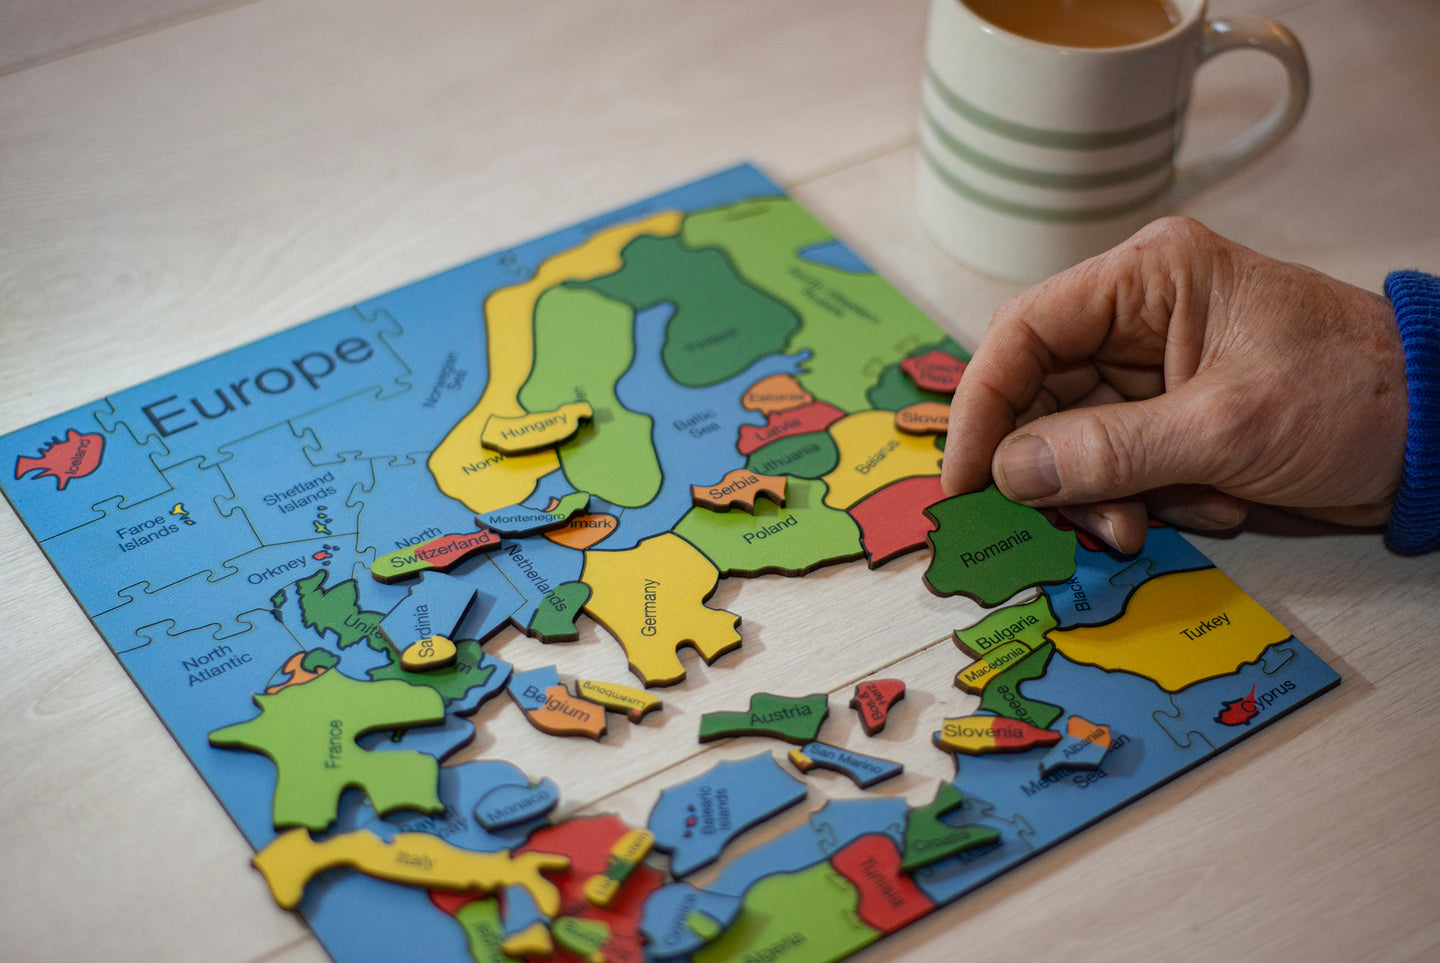 A wooden puzzle of the Countries of Europe. A hand on the right of the puzzle a hand holds the Romania Piece. There is a cup of tea in the background.